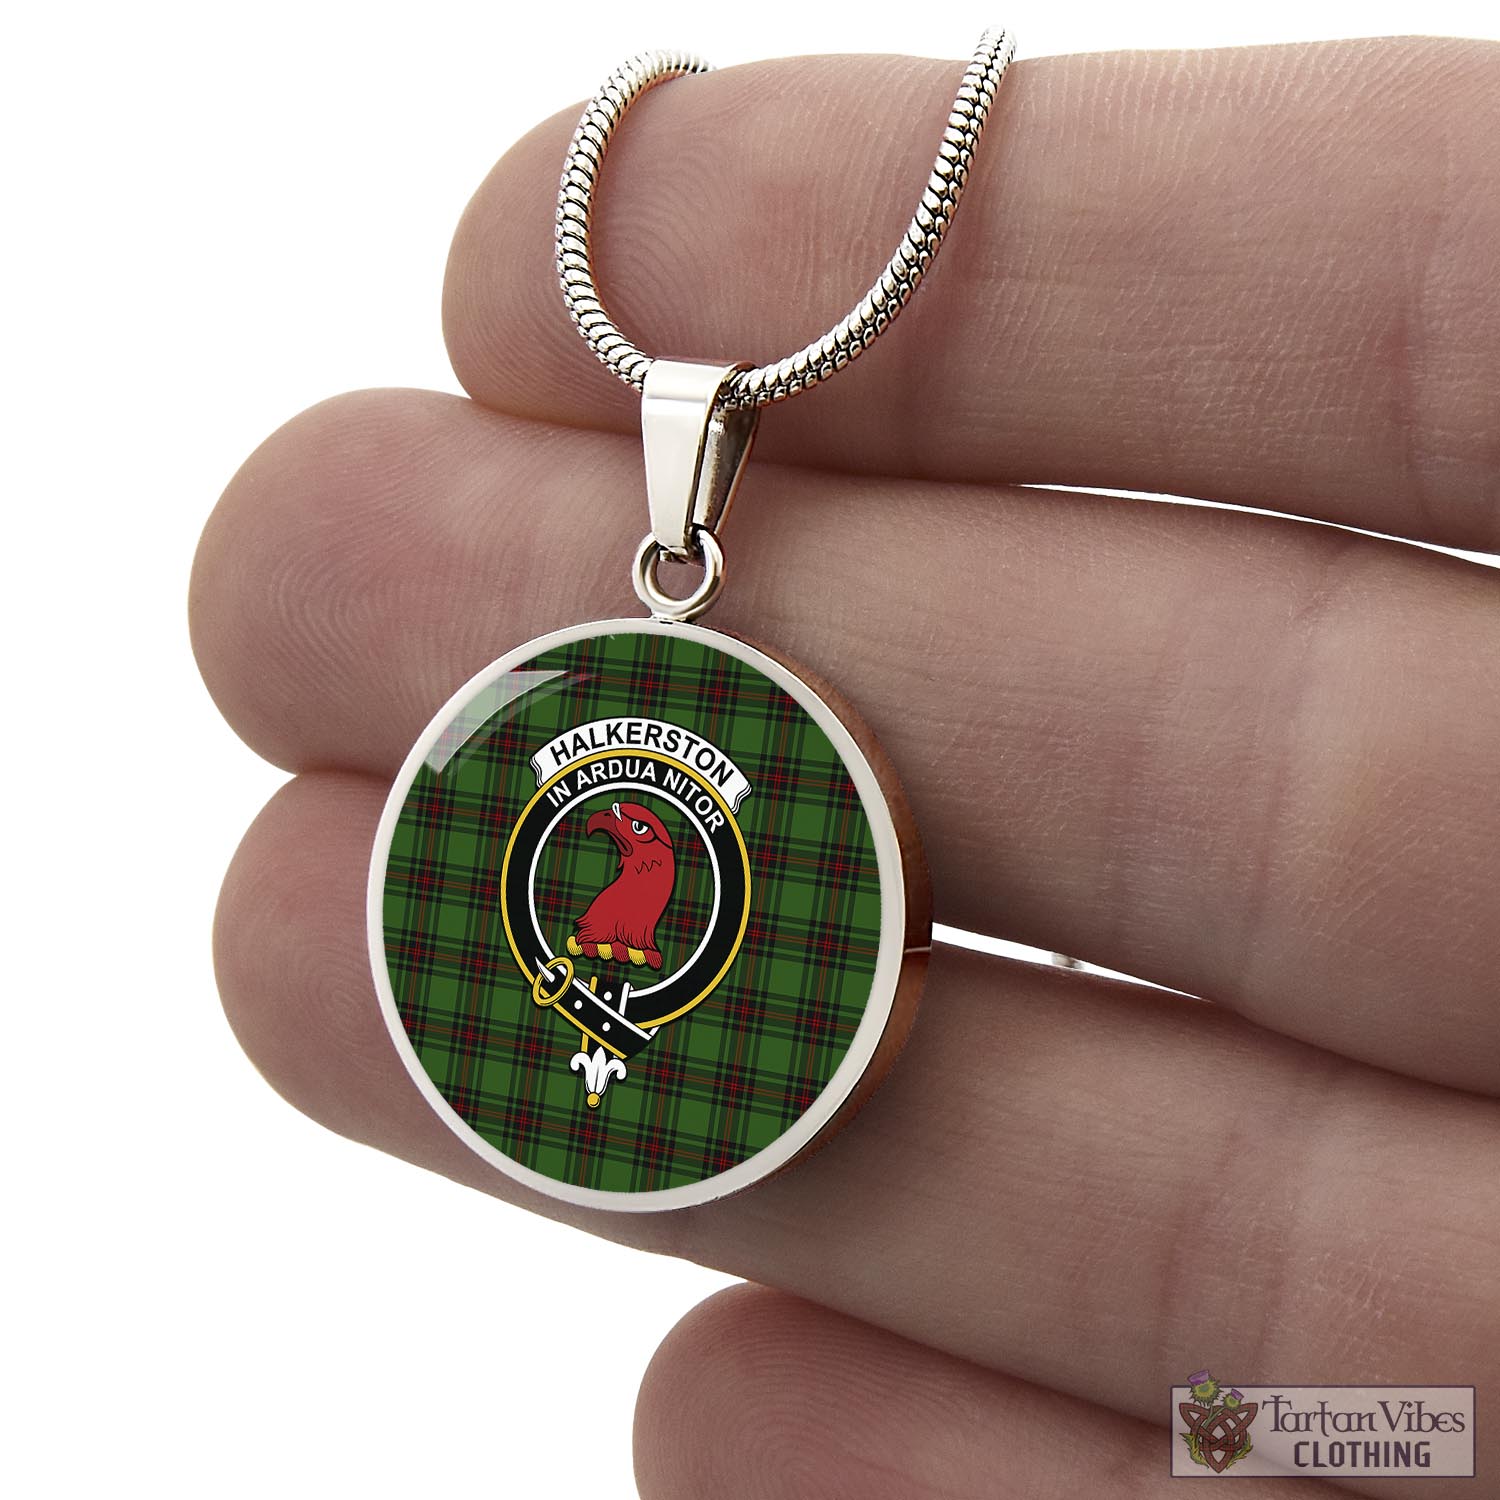 Tartan Vibes Clothing Halkerston Tartan Circle Necklace with Family Crest